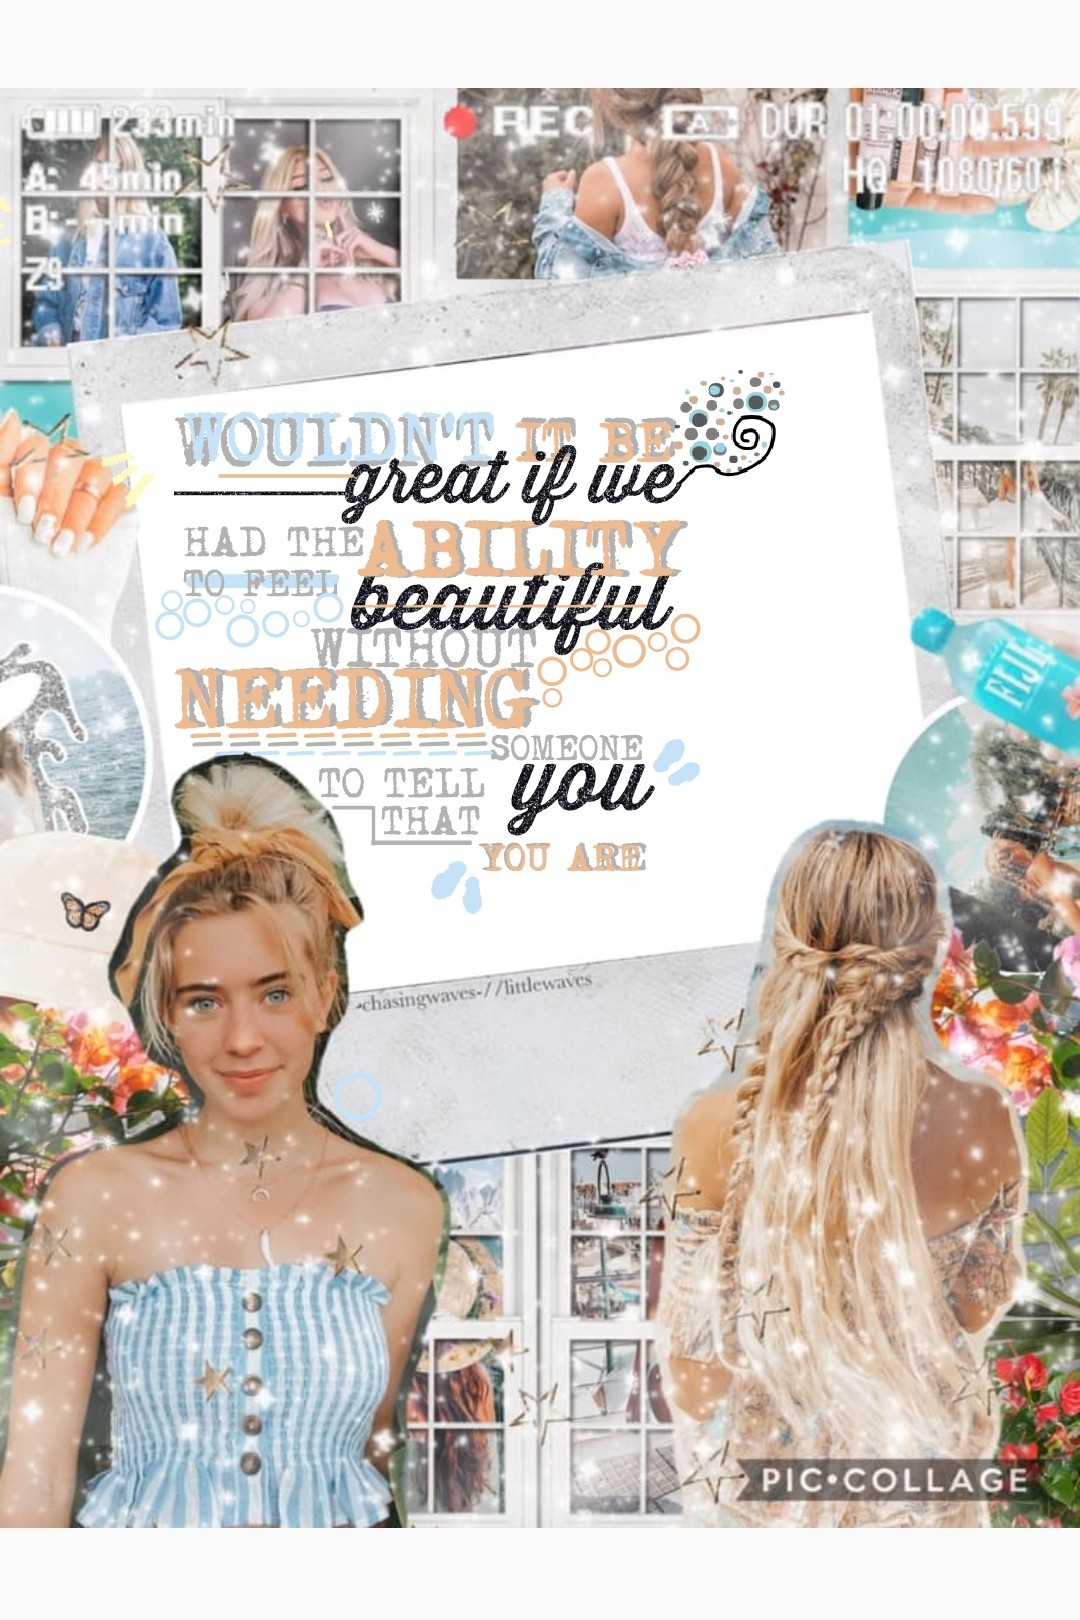 TAP🍿
Collab with the talented -chasingwaves-! 😇I really love how this turned out! She did the bg and I did the text! Make sure to go follow her breathtaking acc. 🌼💡